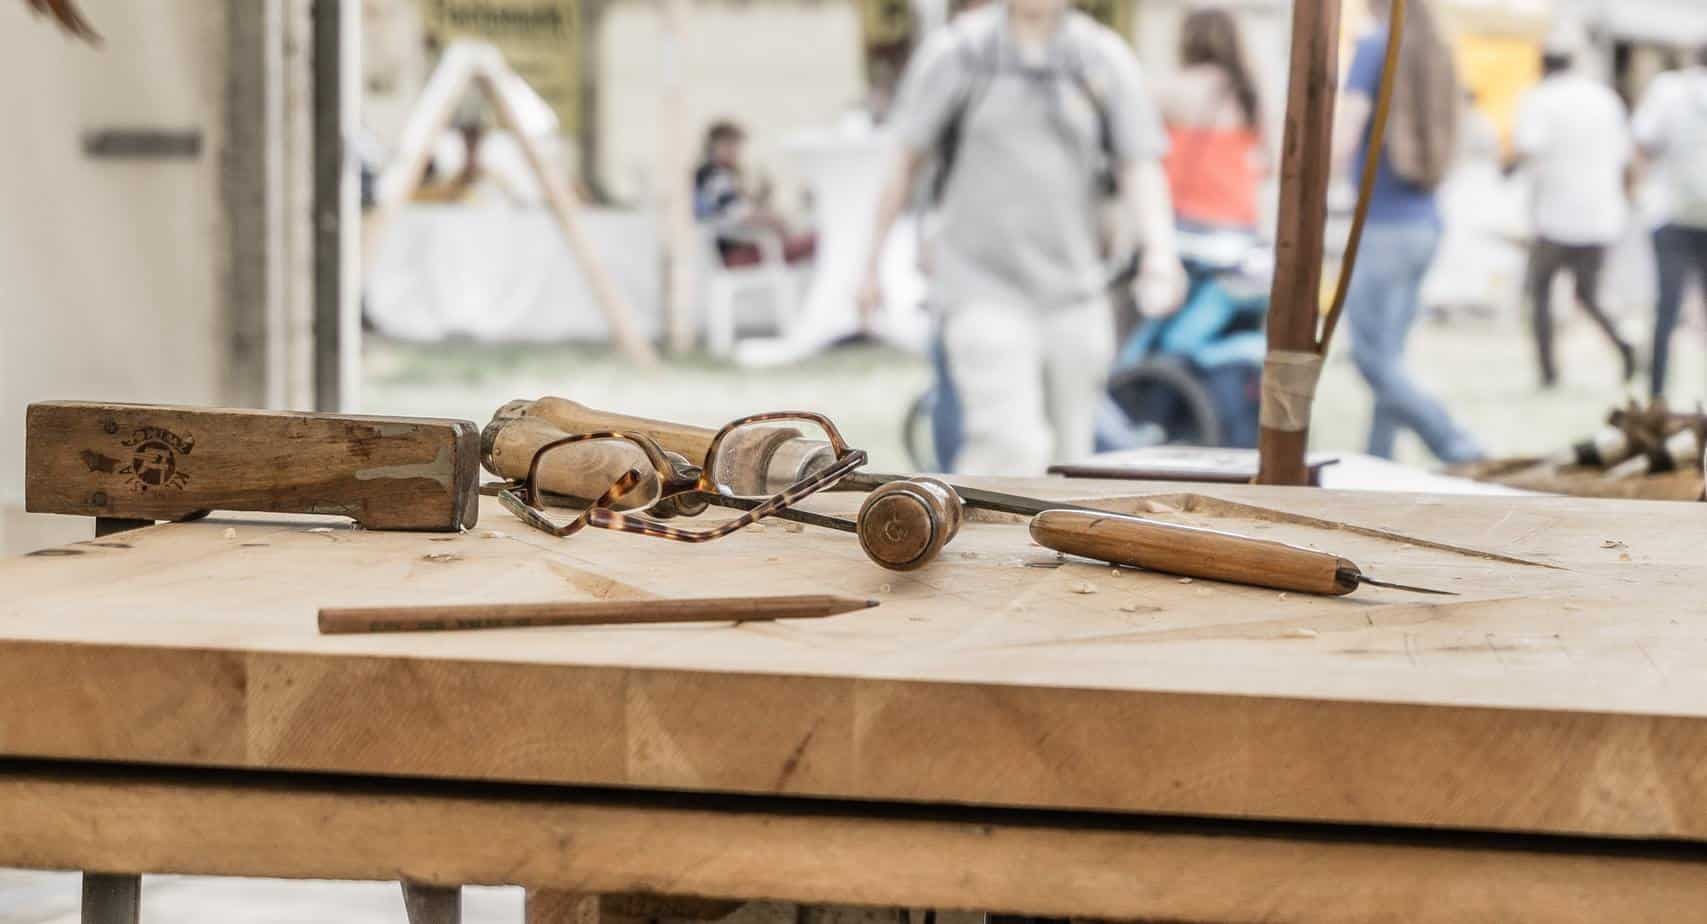 photo of a workbench with some marking tools on it and an old pair of glasses with people walking around in the background.